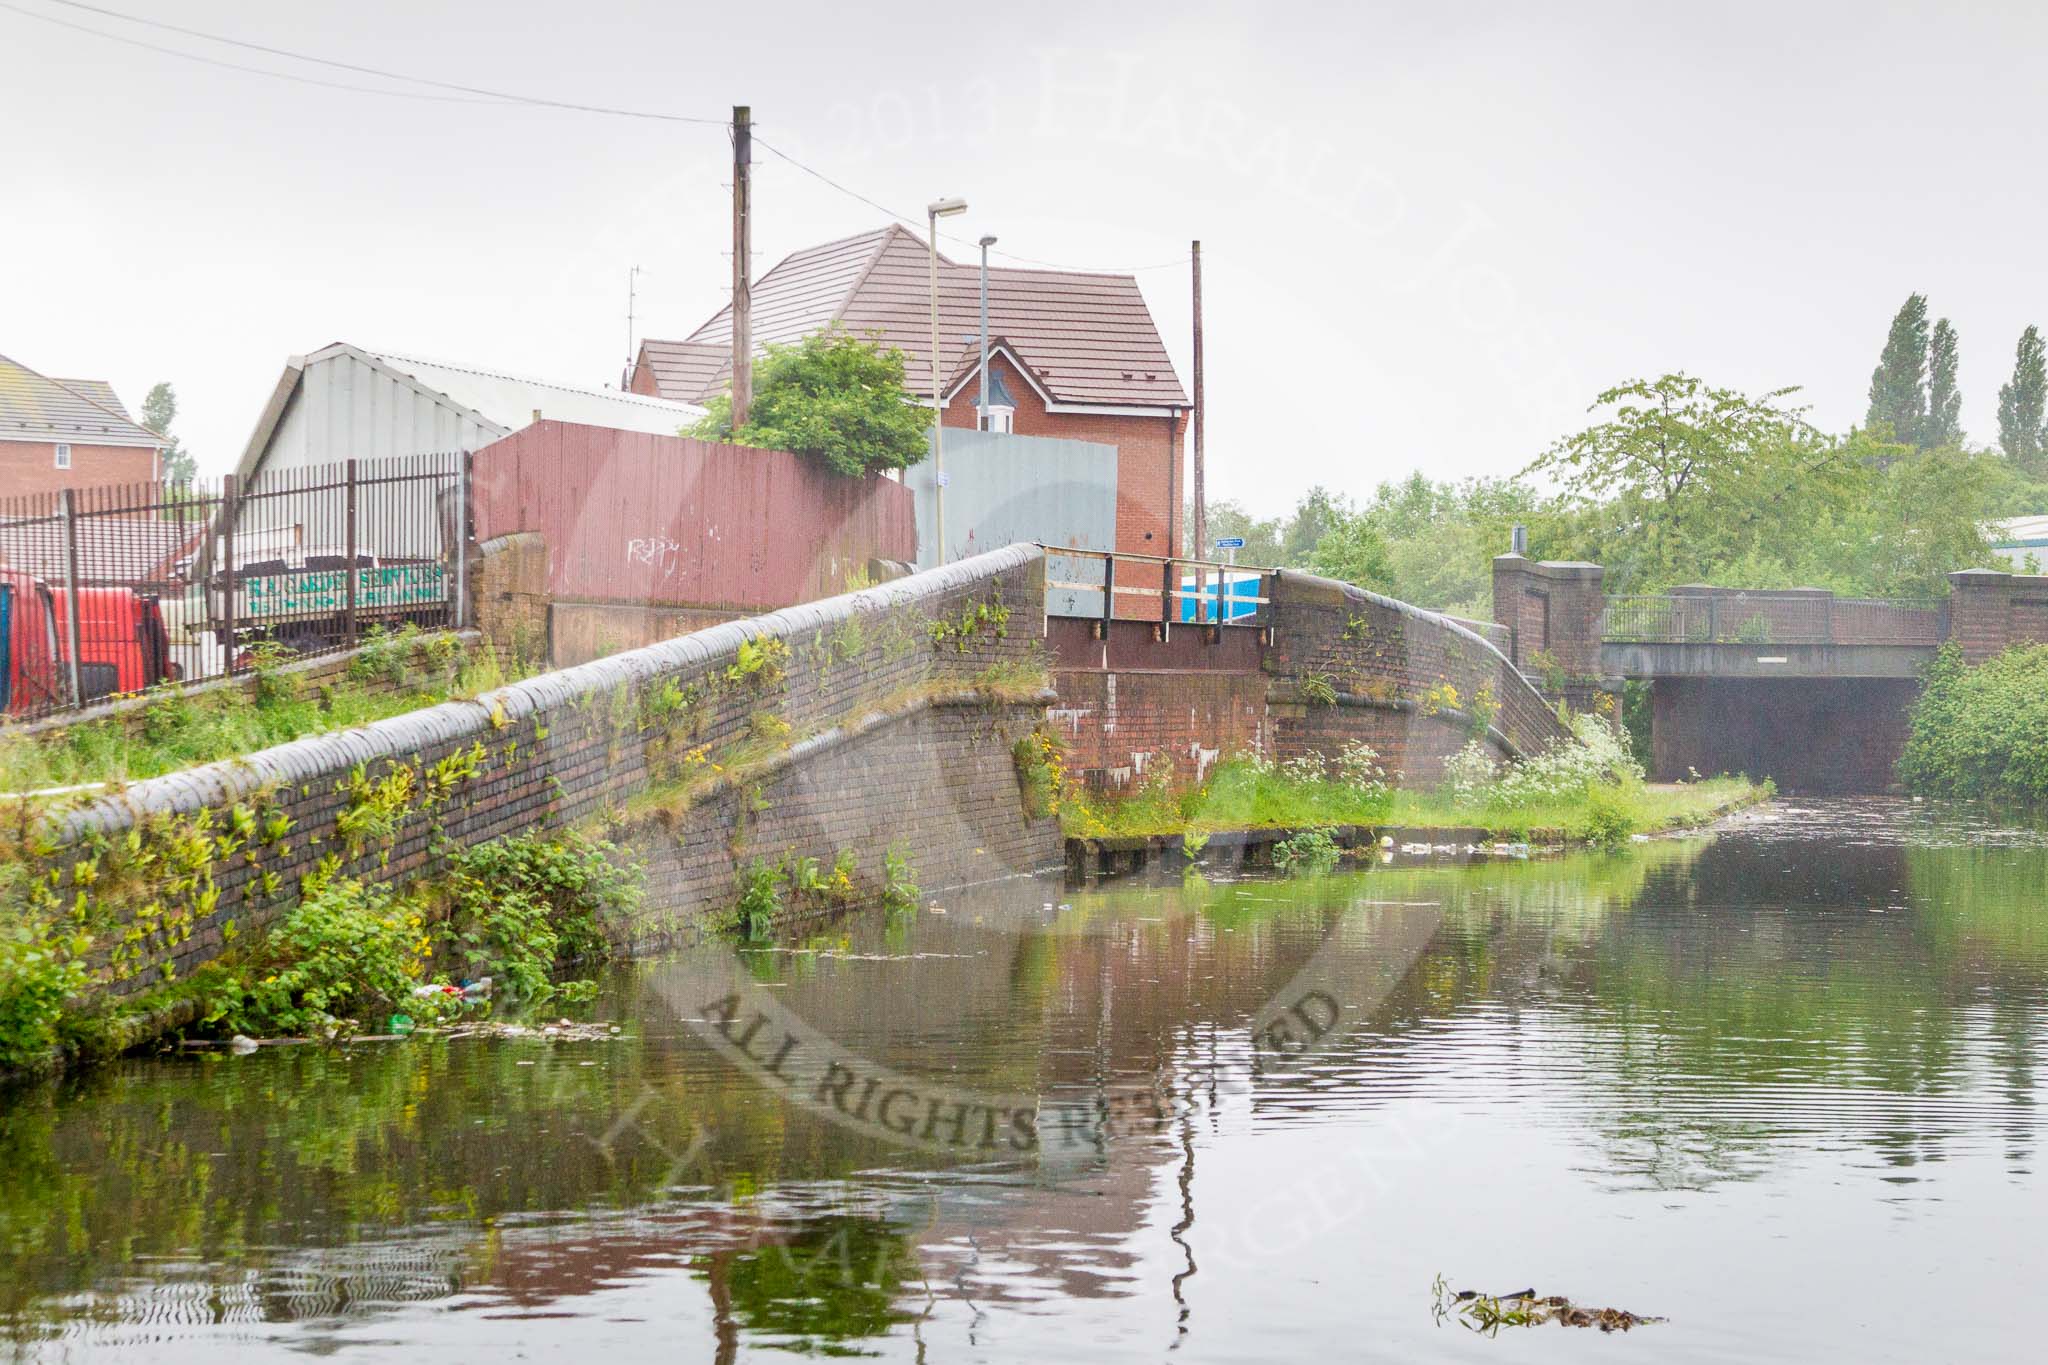 BCN Marathon Challenge 2014: Remains of the bridge that once leadto the Withymoor Arm of the Dudley No 1 Canal, next to Griffin Bridge.
Birmingham Canal Navigation,


United Kingdom,
on 25 May 2014 at 06:42, image #207